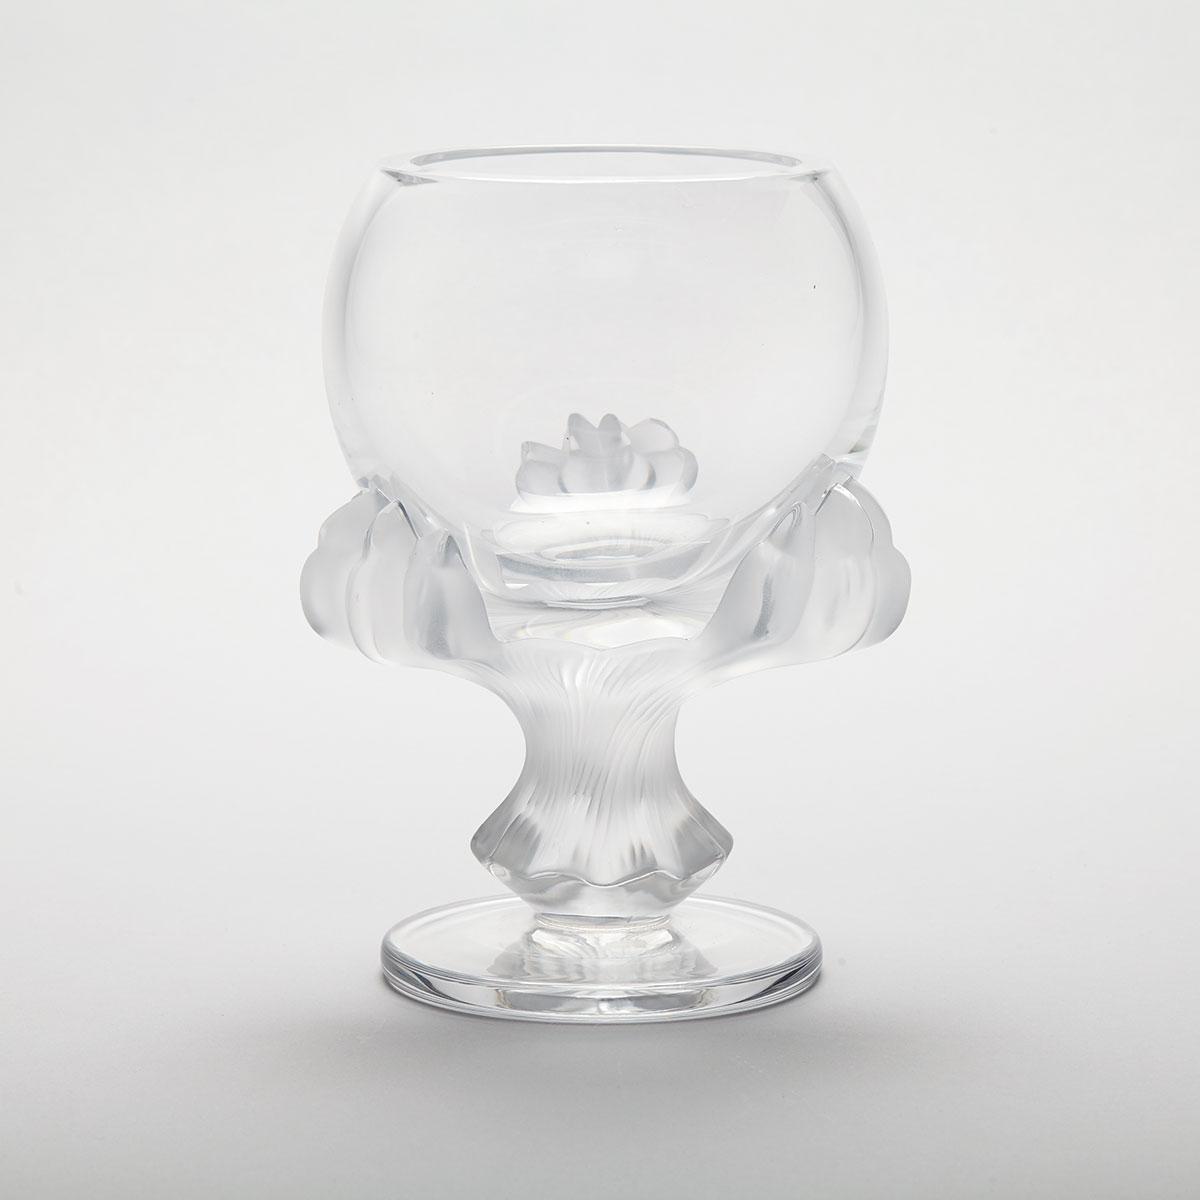 ‘Bagheera’, Lalique Moulded and Partly Frosted Glass Vase, 20th century